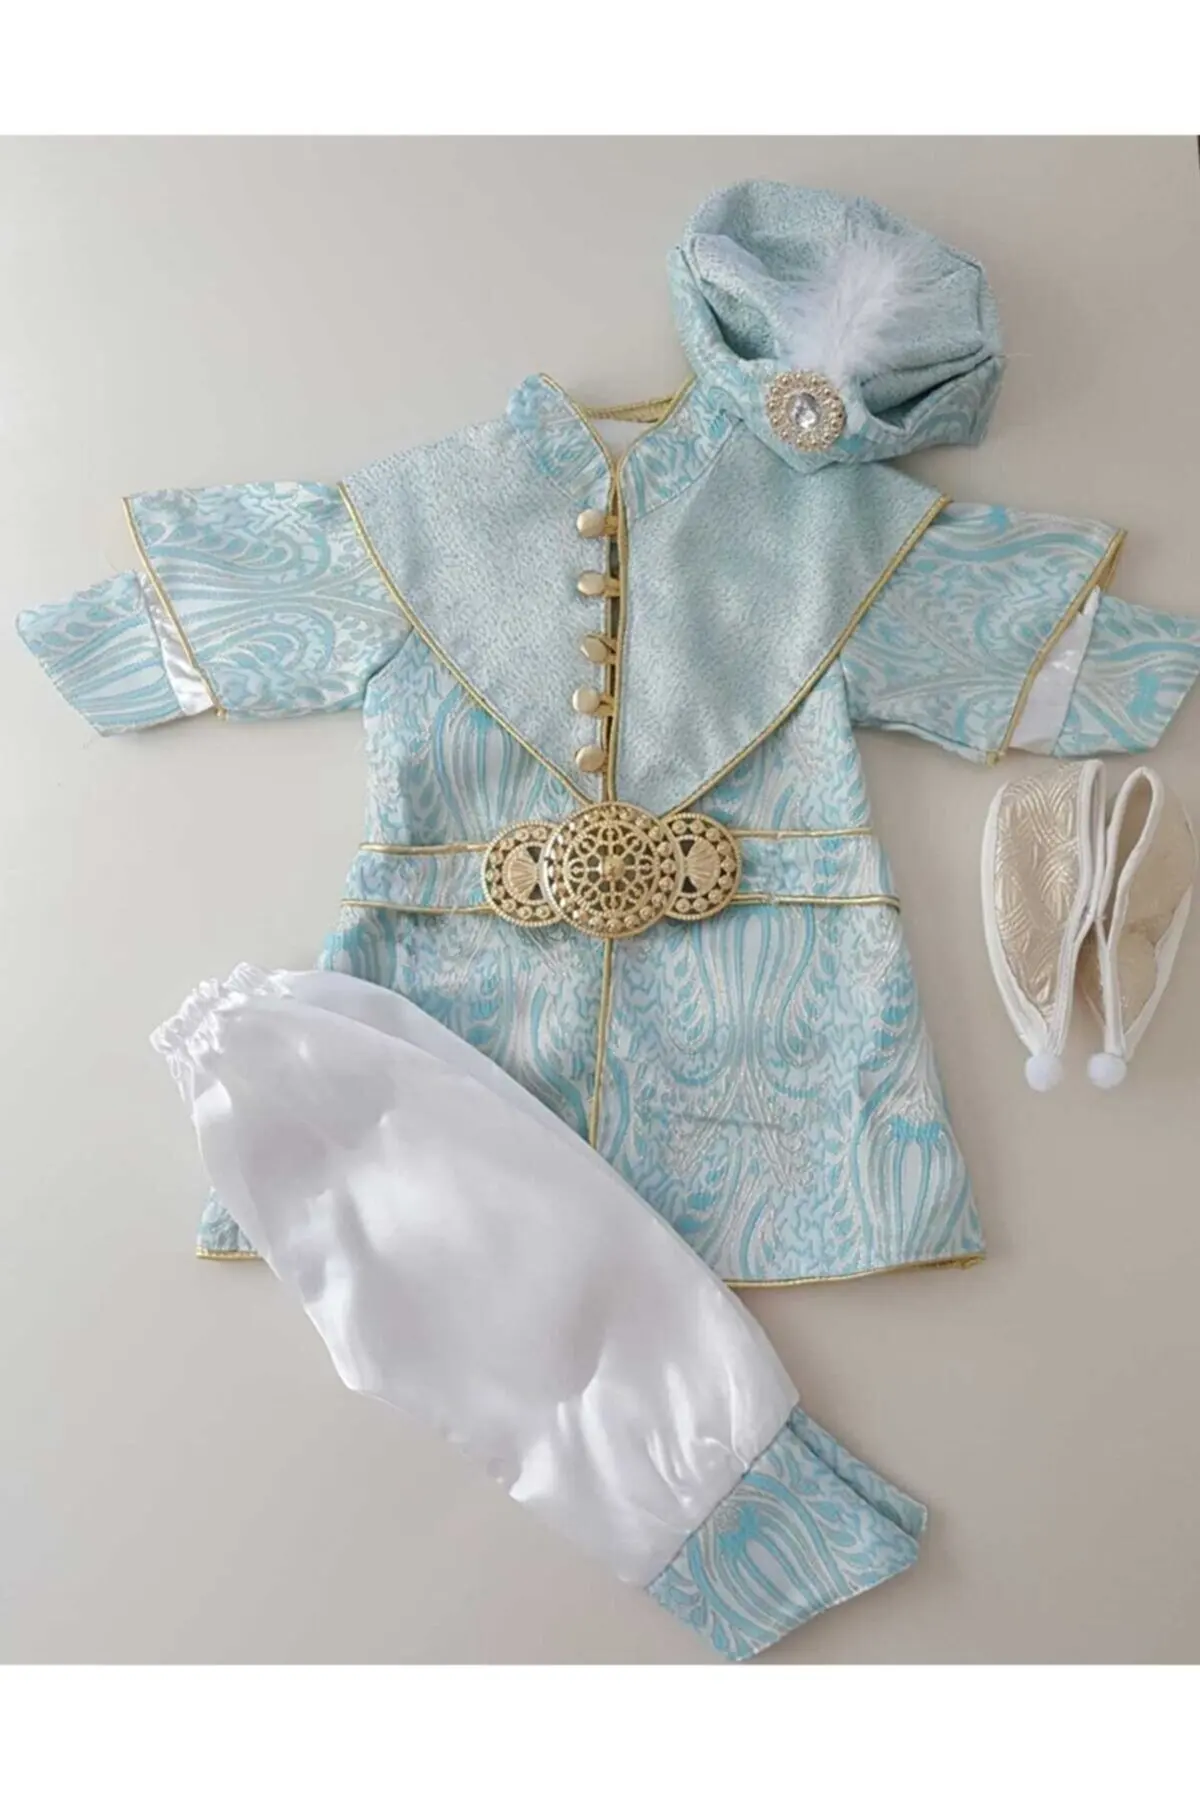 

New 2022 Male Baby Mevlütlük Prince Sünnetlik Circumcision Outfit Male Child Gift Baby Gift Muslim Children 'S Clothes